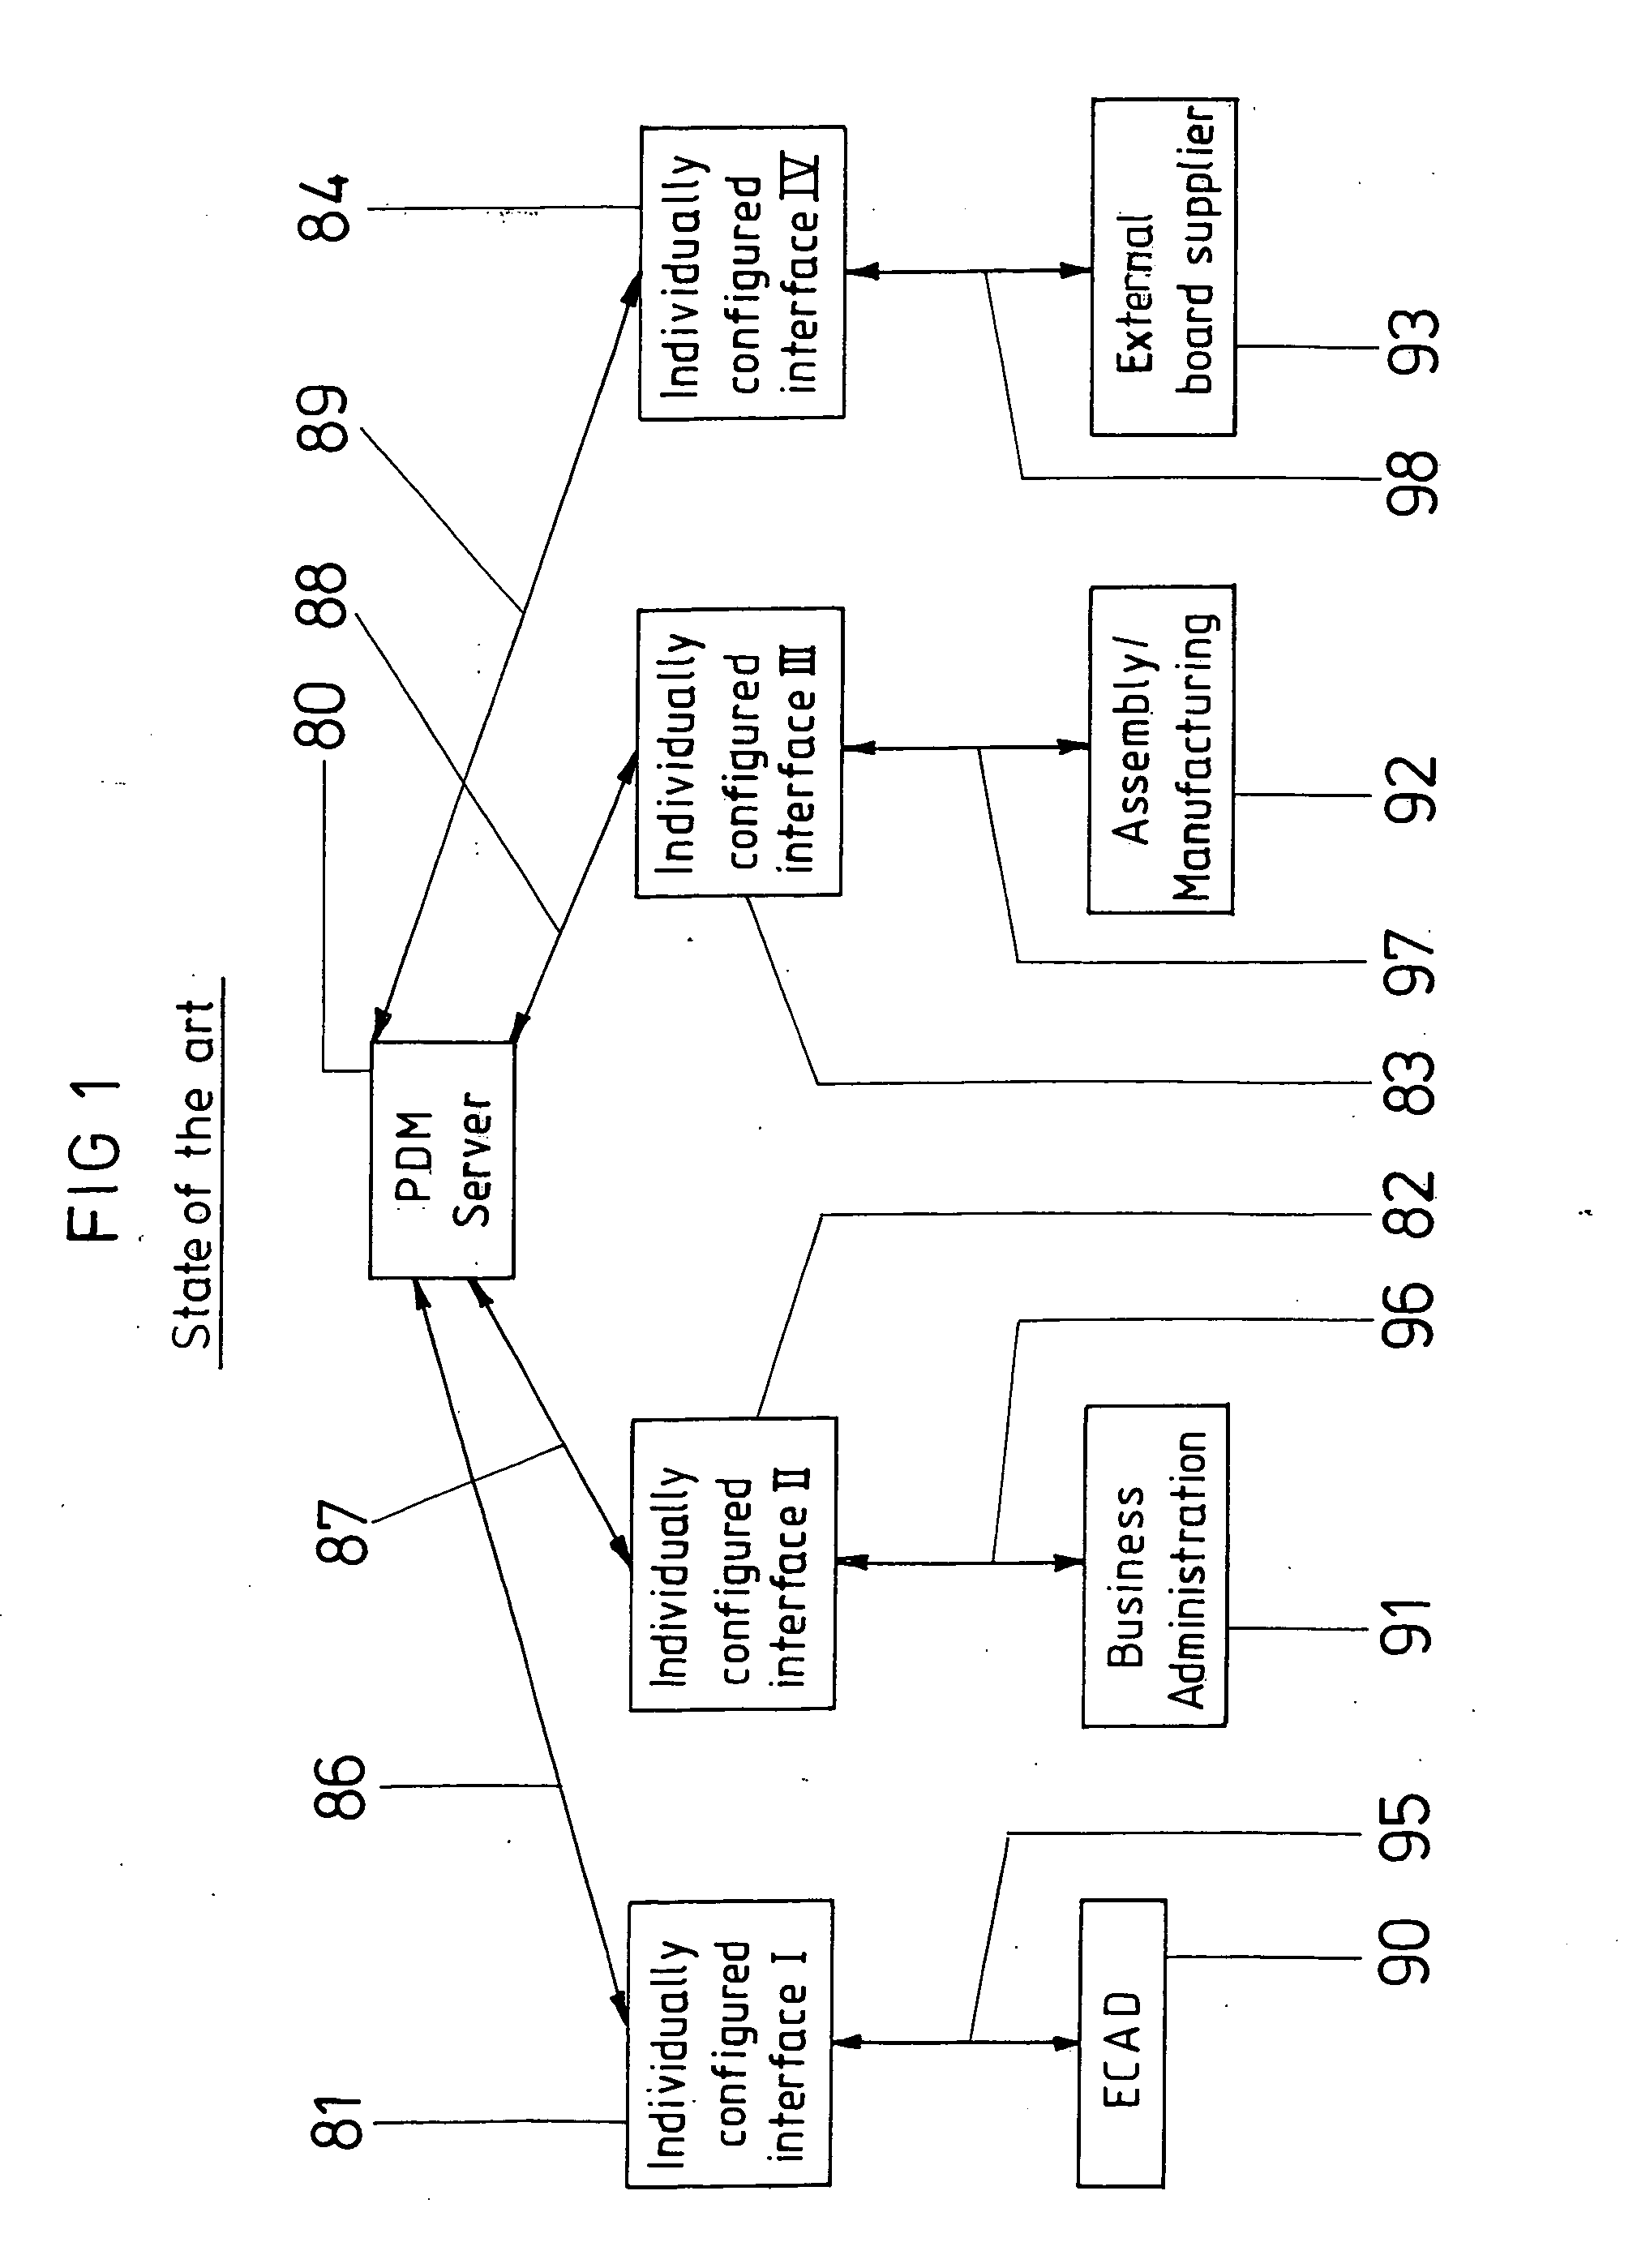 Product data management method and system